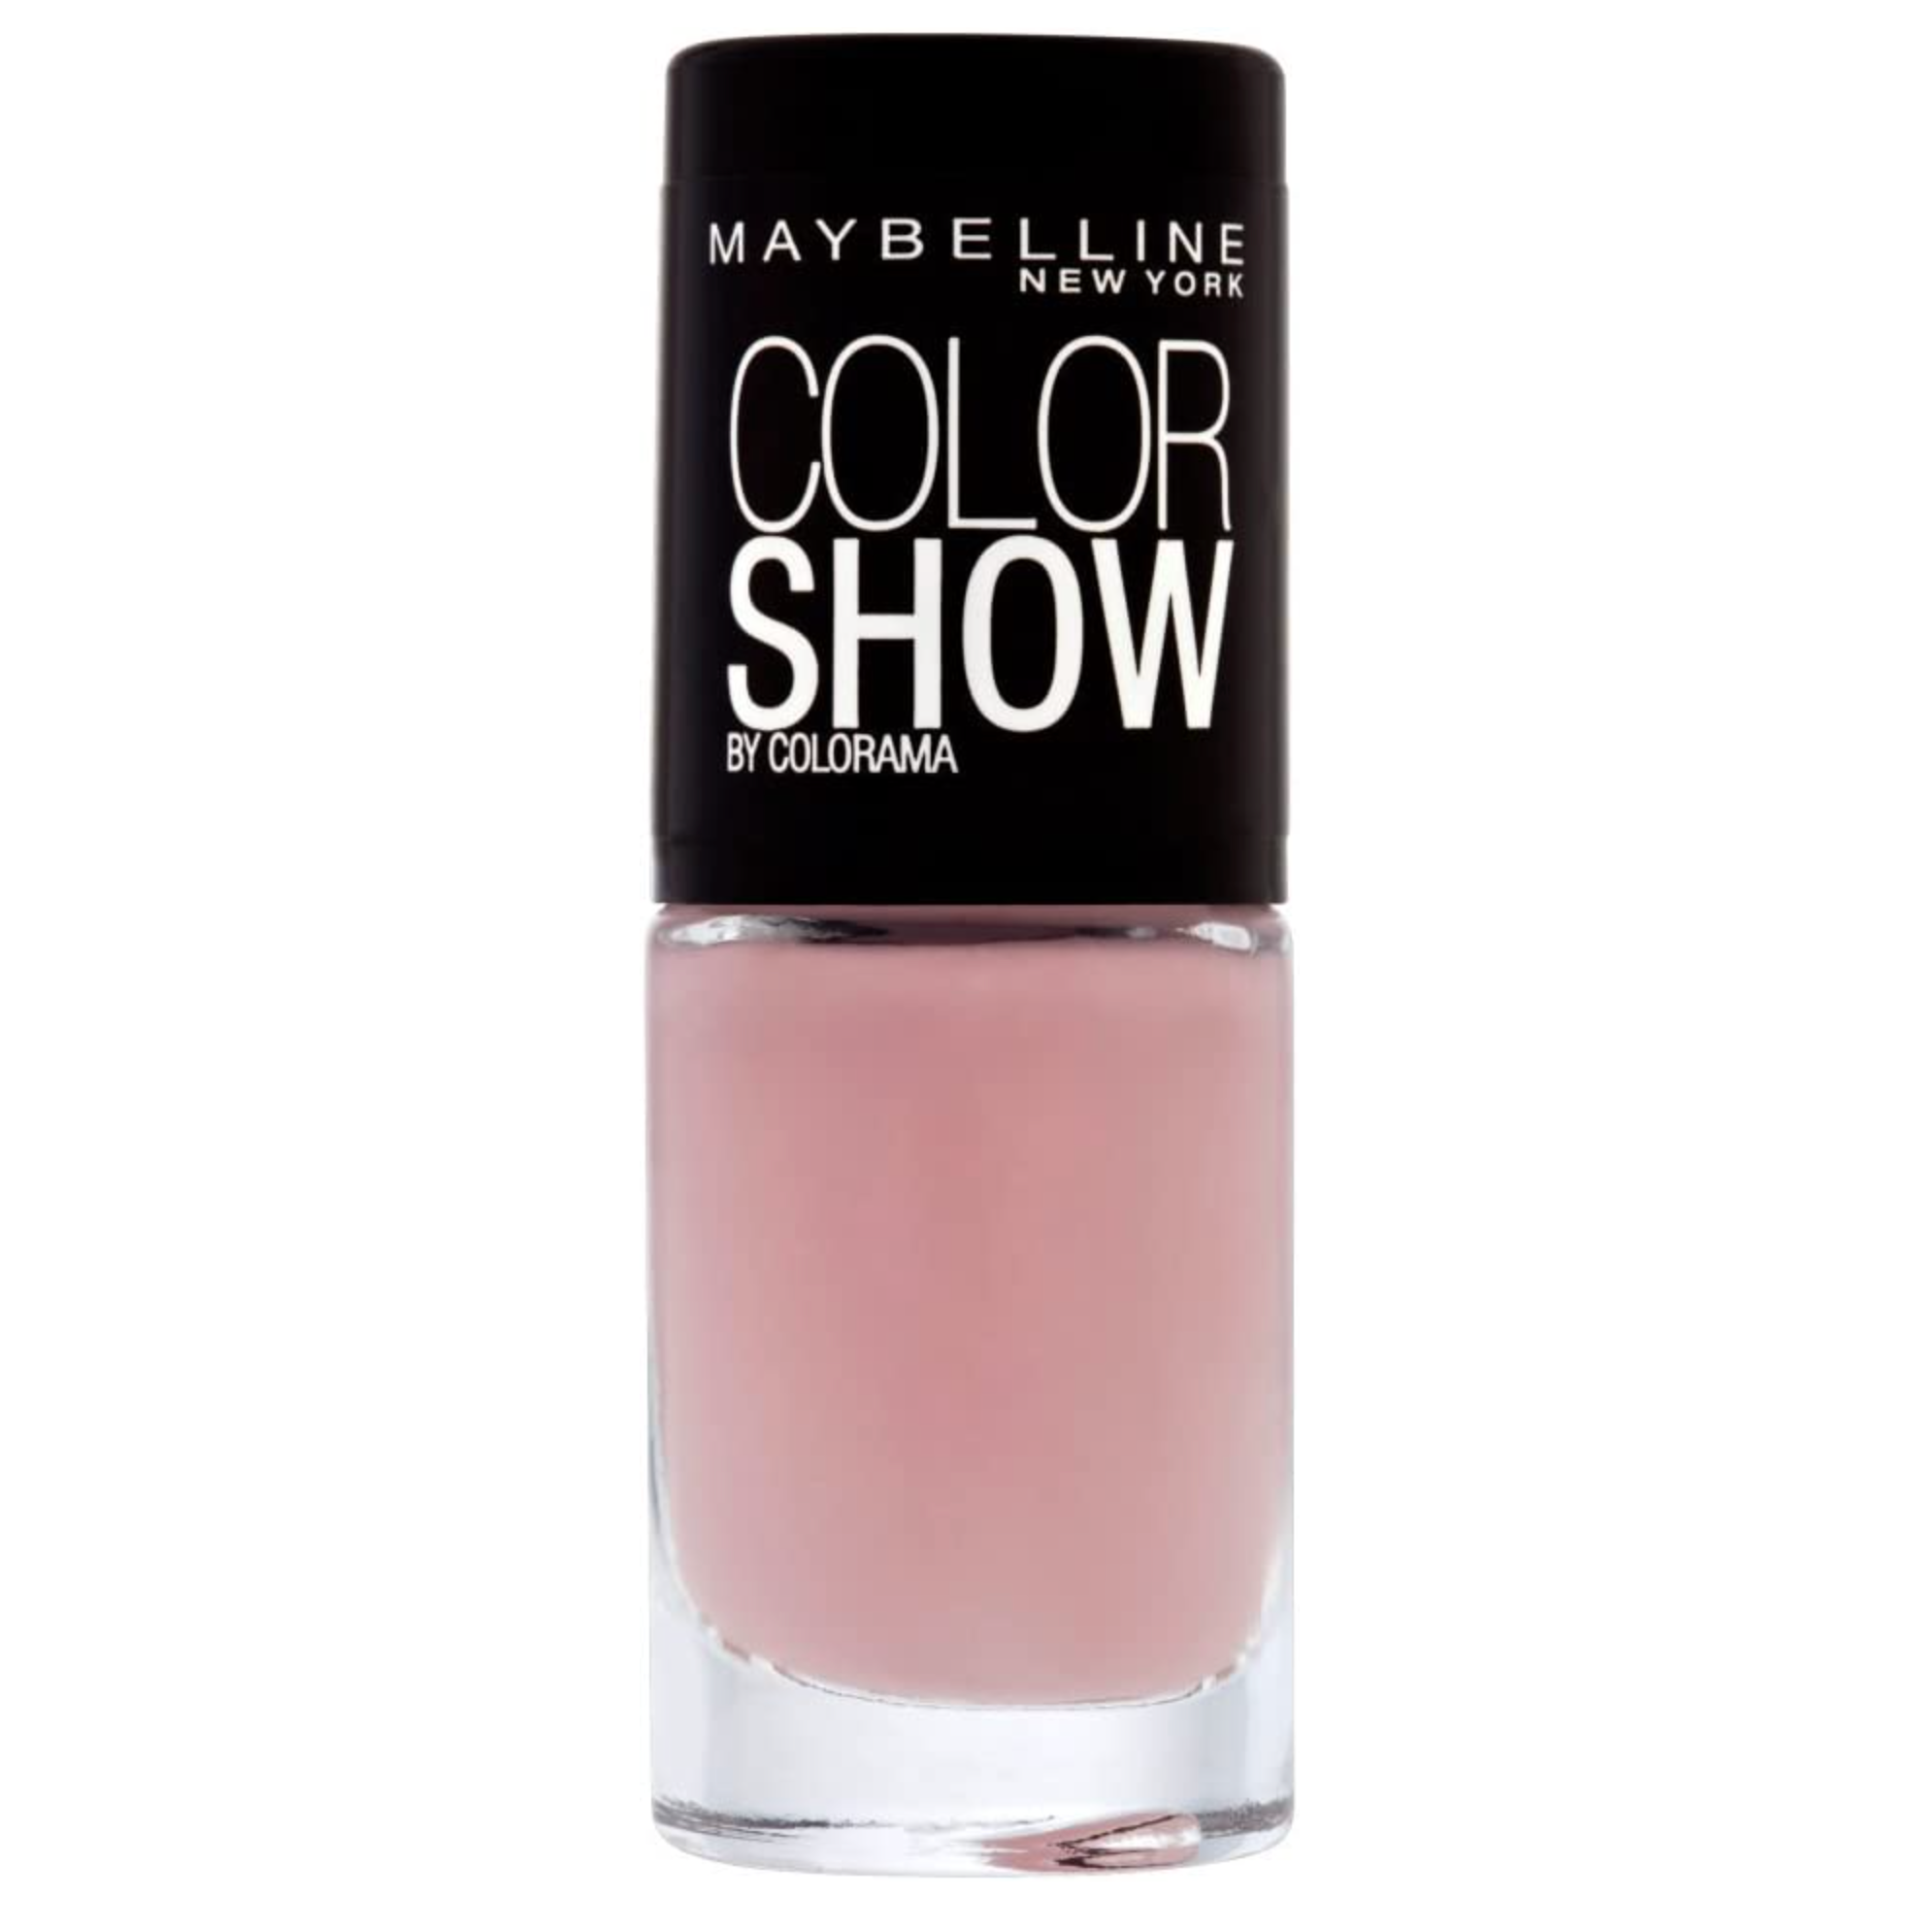 Maybelline Color Show Nail Polish - 301 Love This Sweater